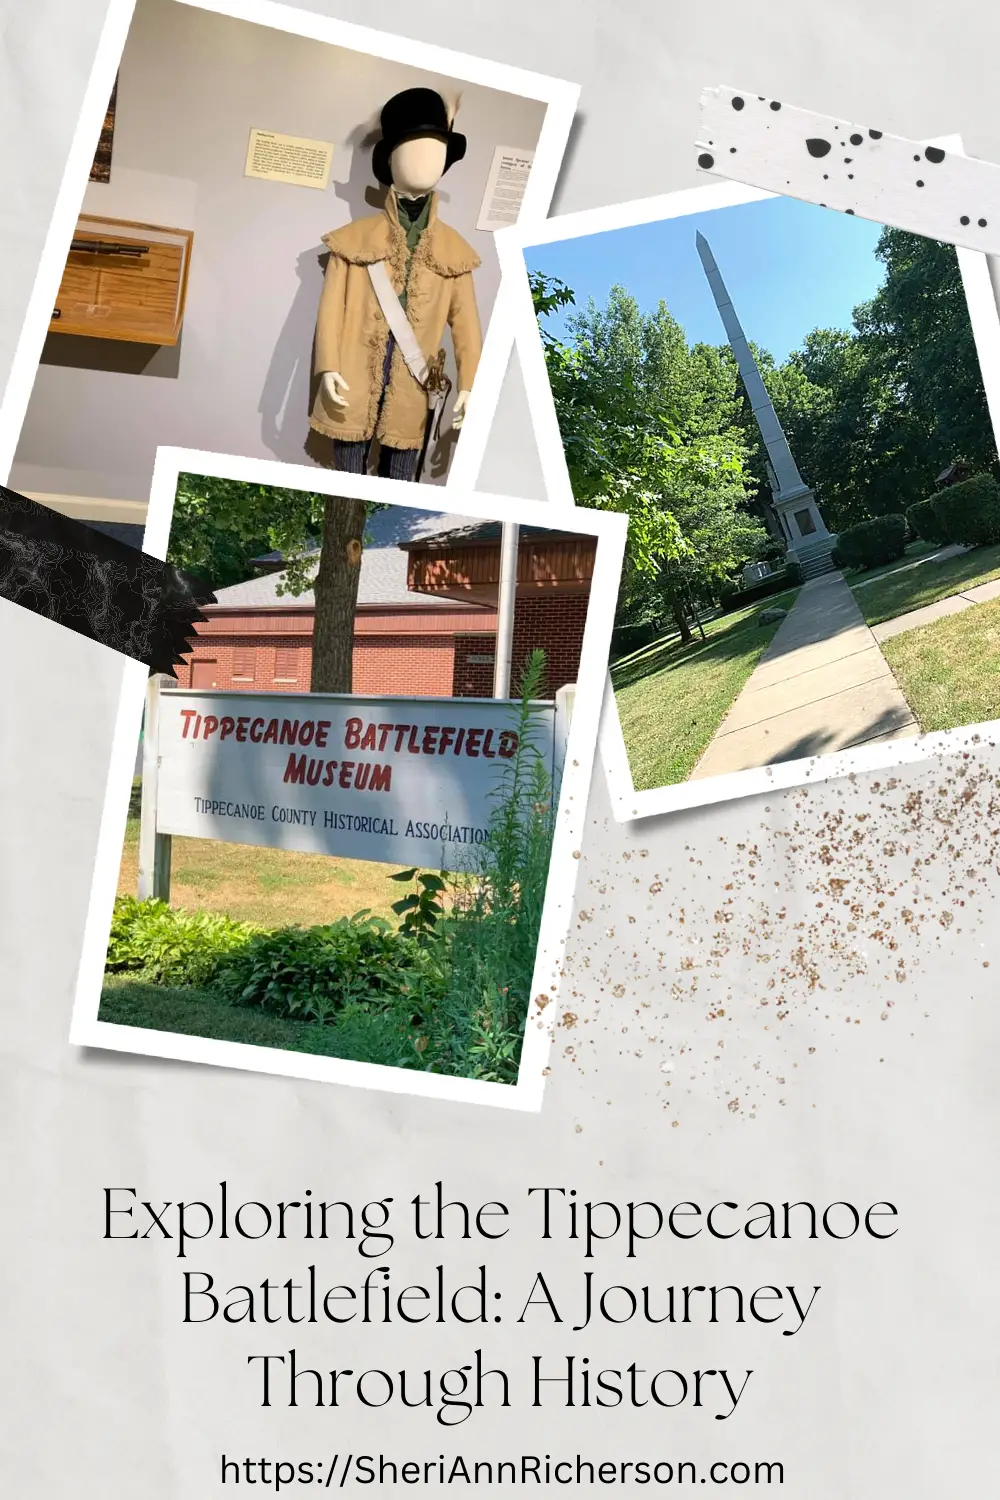 Images from the Museum at the Tippecanoe Battle site.